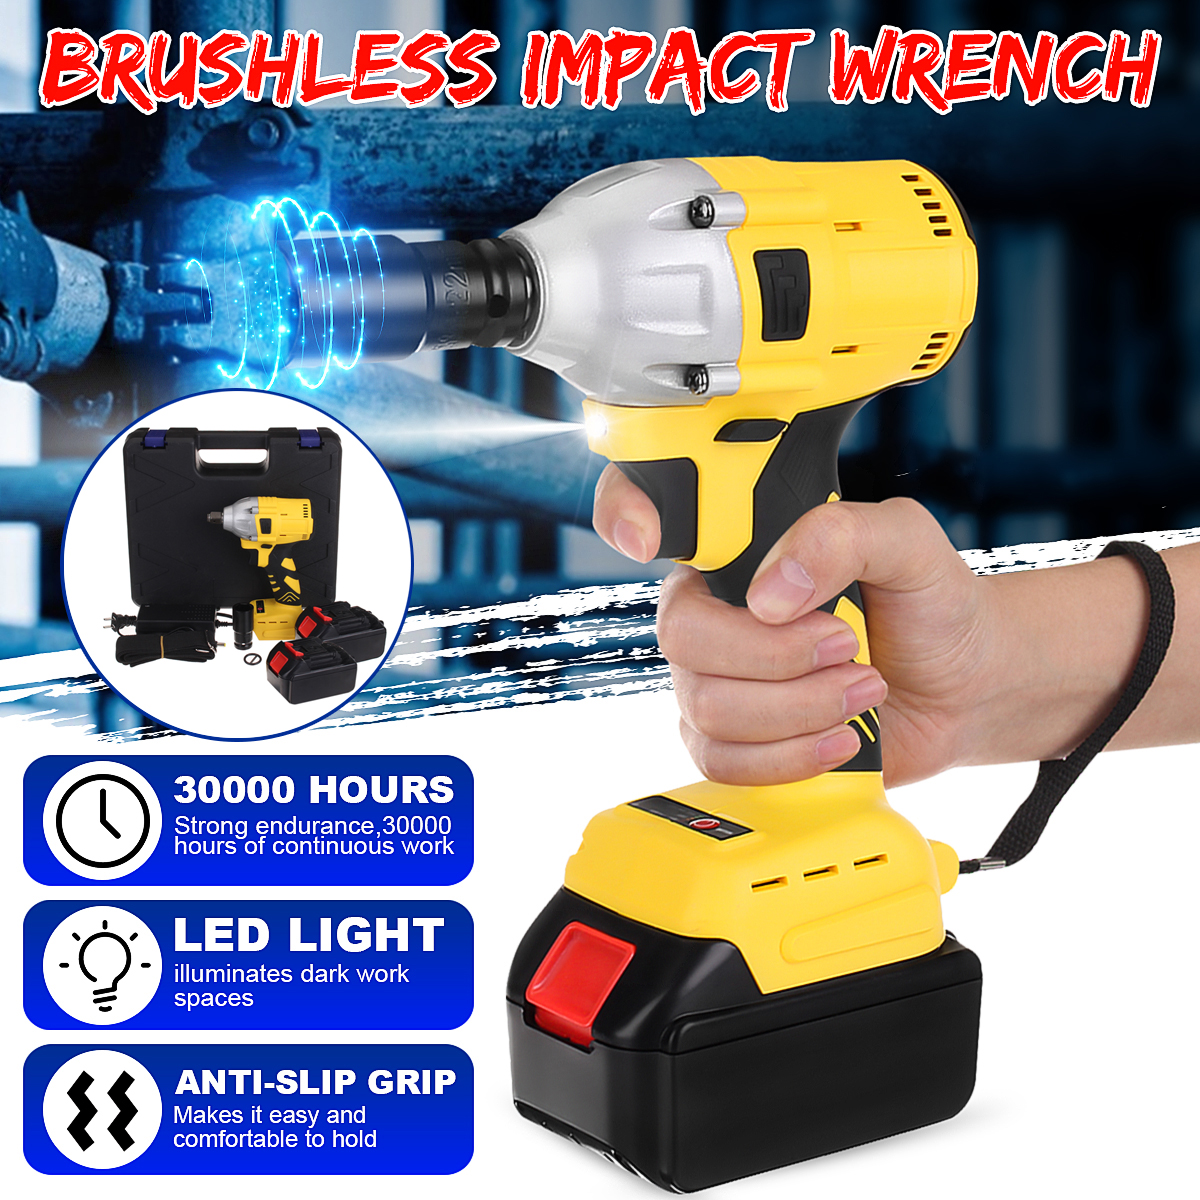 12-Cordless-Brushless-Impact-Wrench-Brushless-Motor-Power-Driver-Electric-Wrench-with-2-Battery-1807111-1